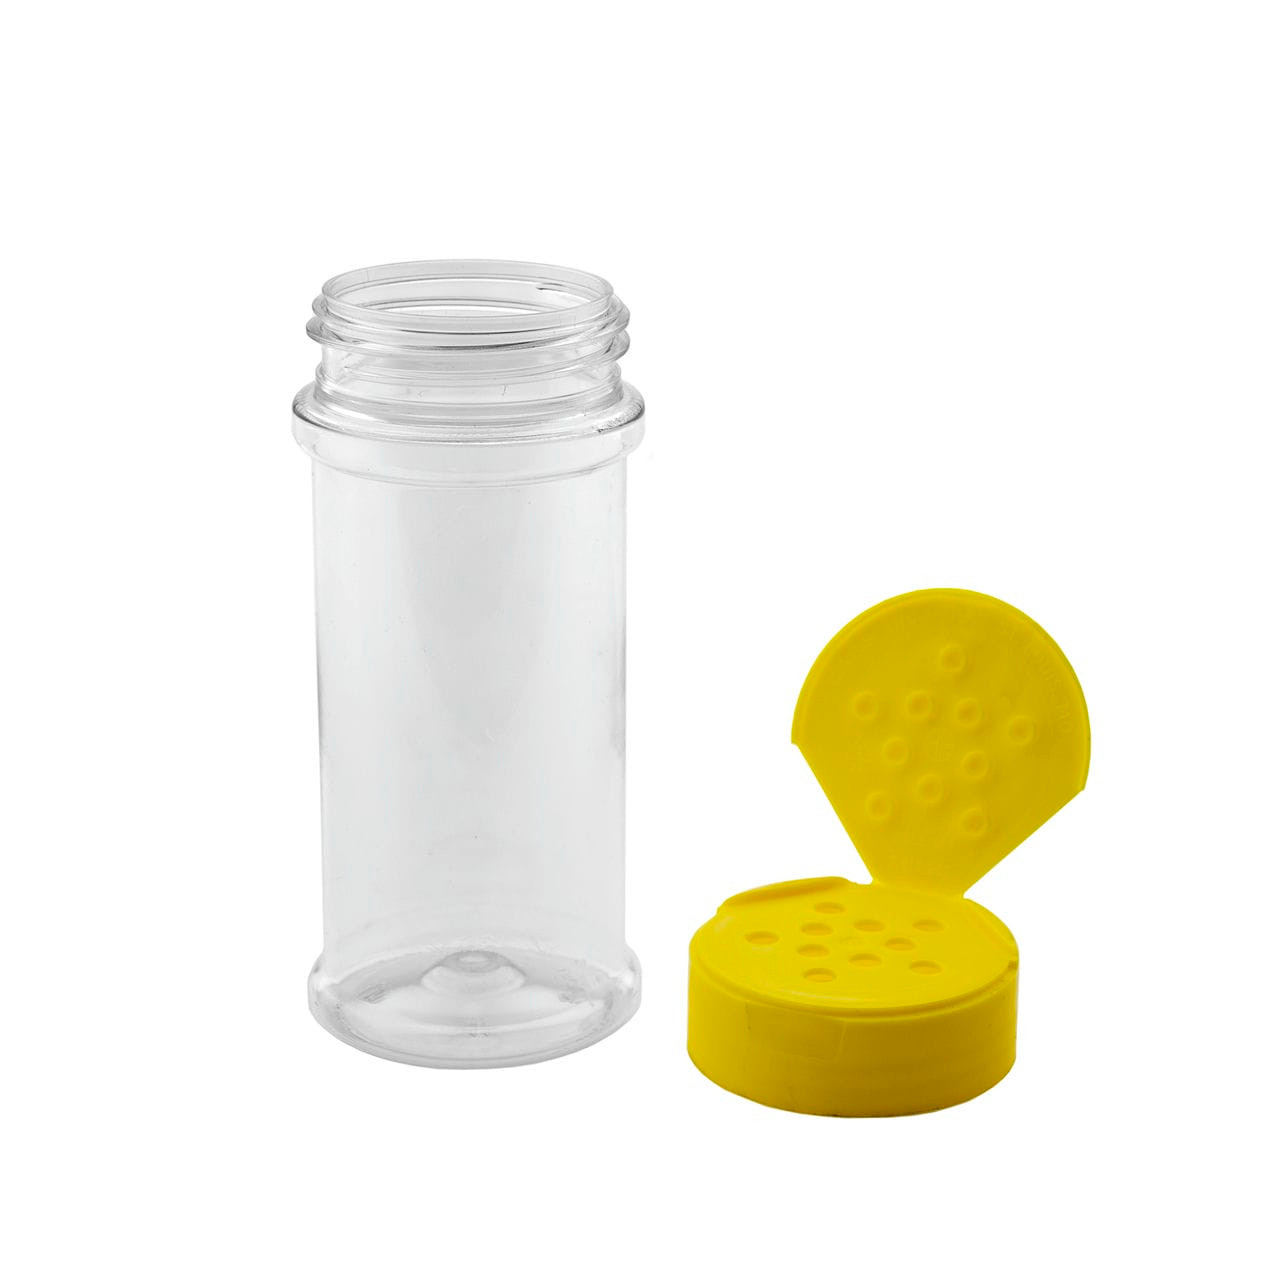 https://cdn11.bigcommerce.com/s-p3slyoyyuy/images/stencil/1280x1280/products/25598/45554/containers-8oz_yellow_disconnected__65083.1678920998.jpg?c=1